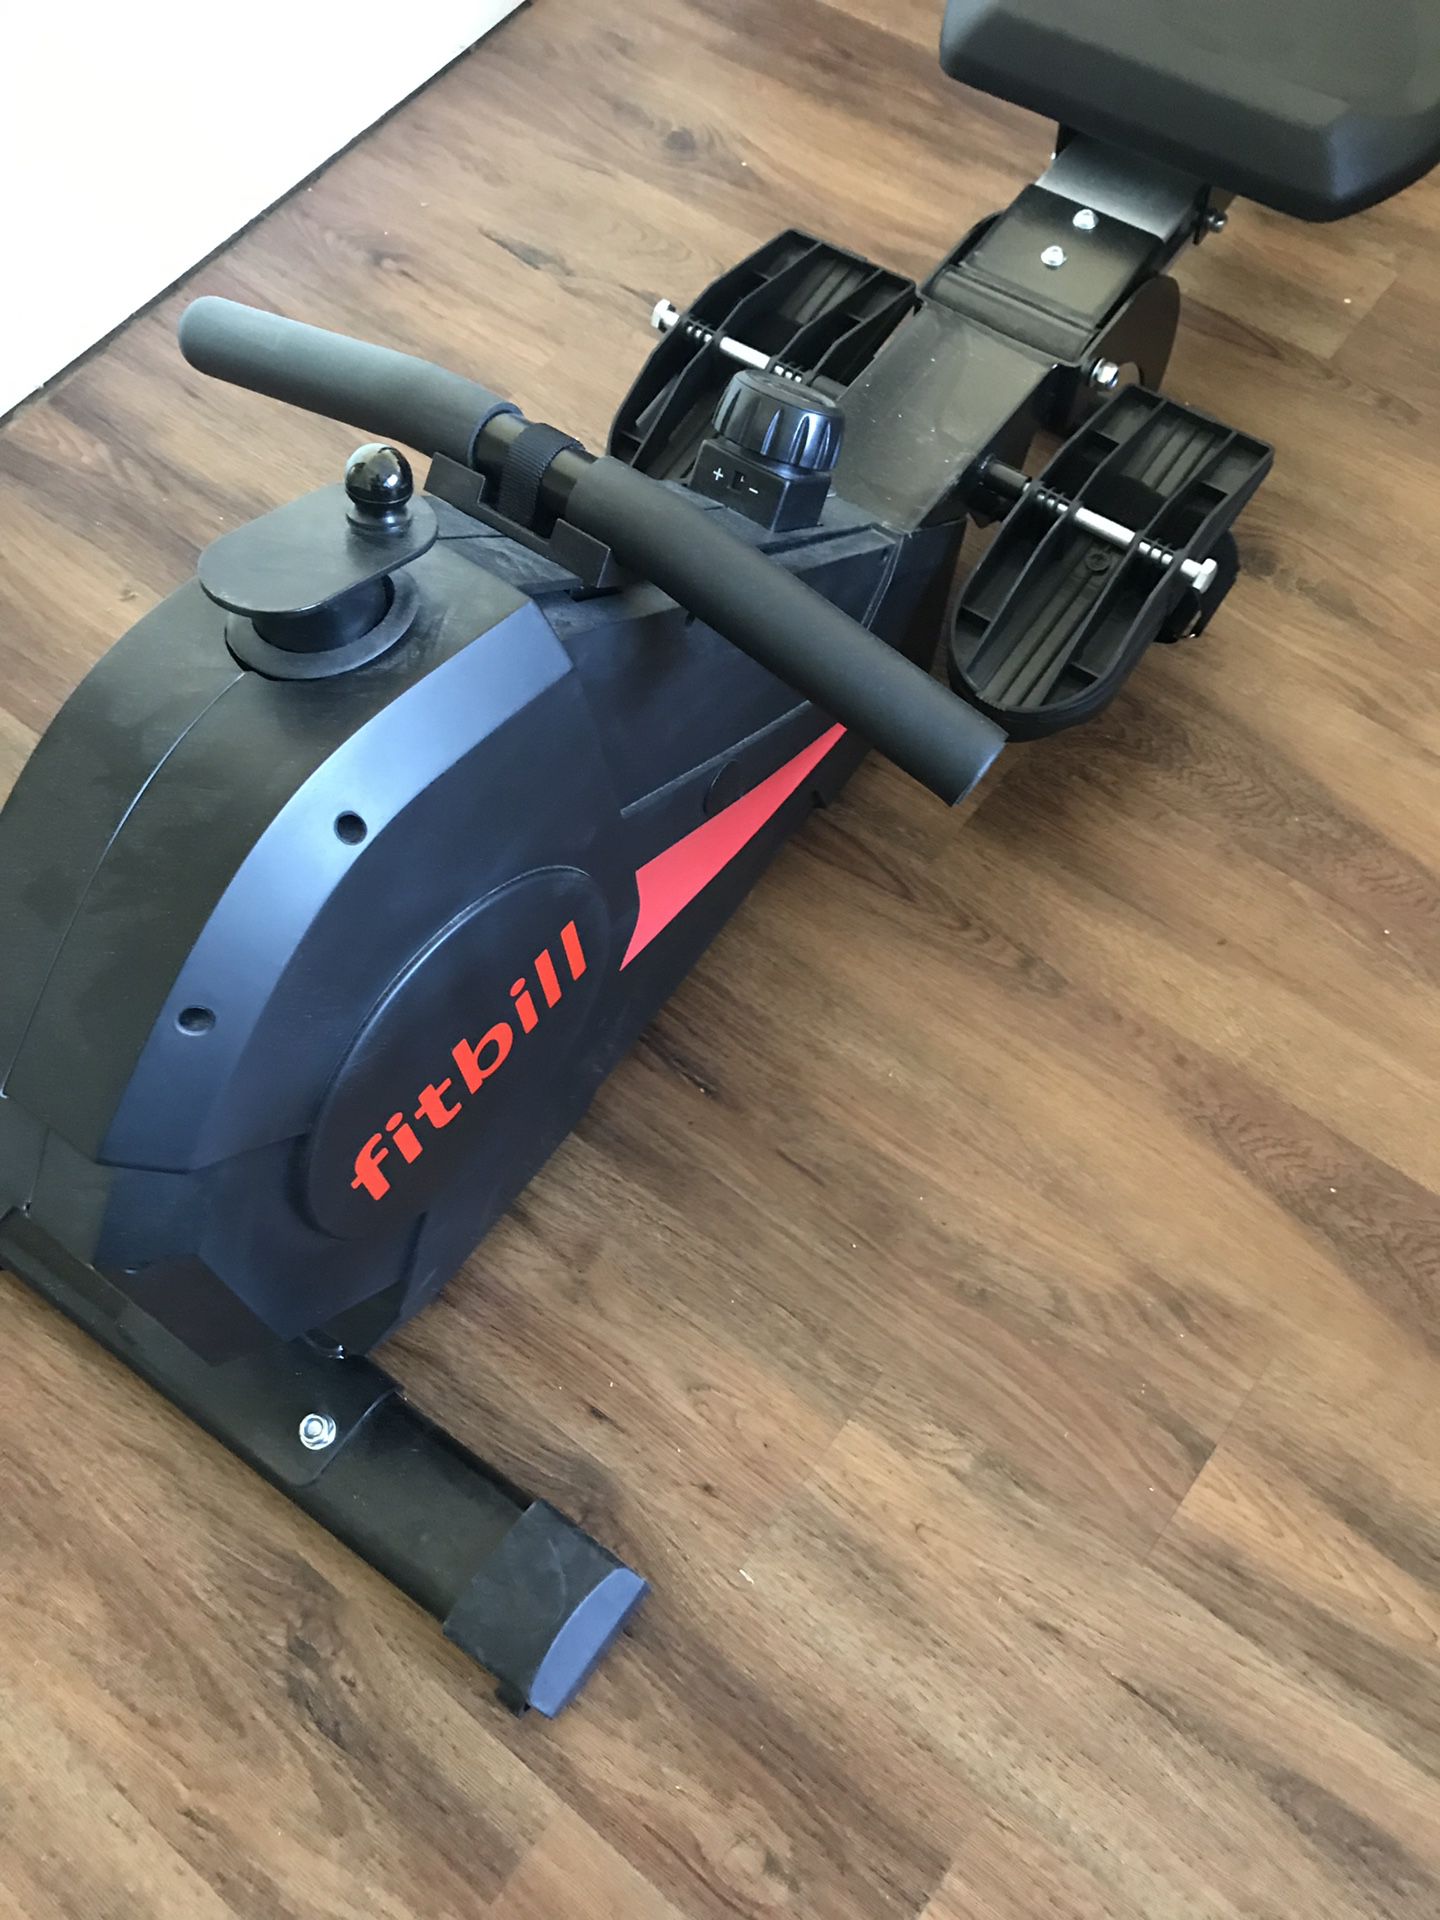 fitbill FB607 Rowing Machine $140